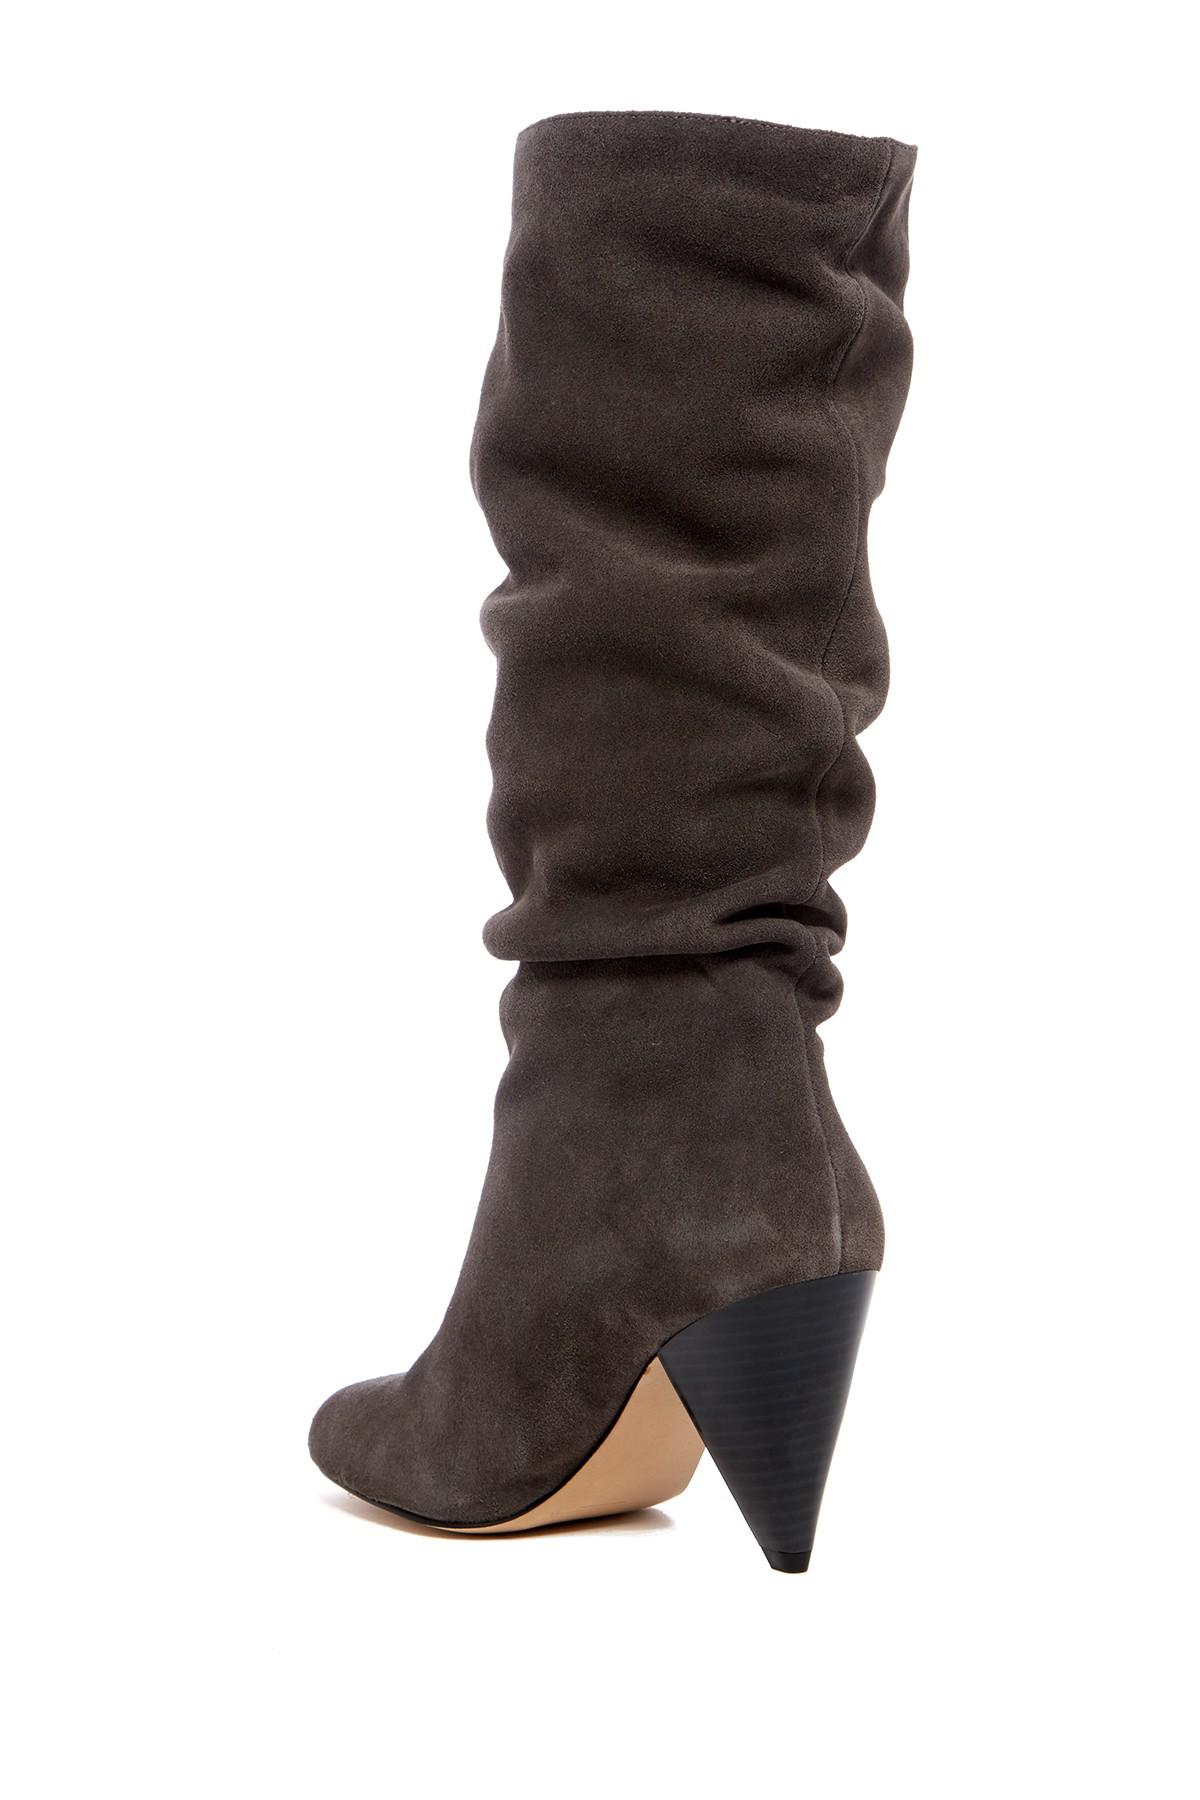 Sole Society Suede Gerii Slouch Boot in 